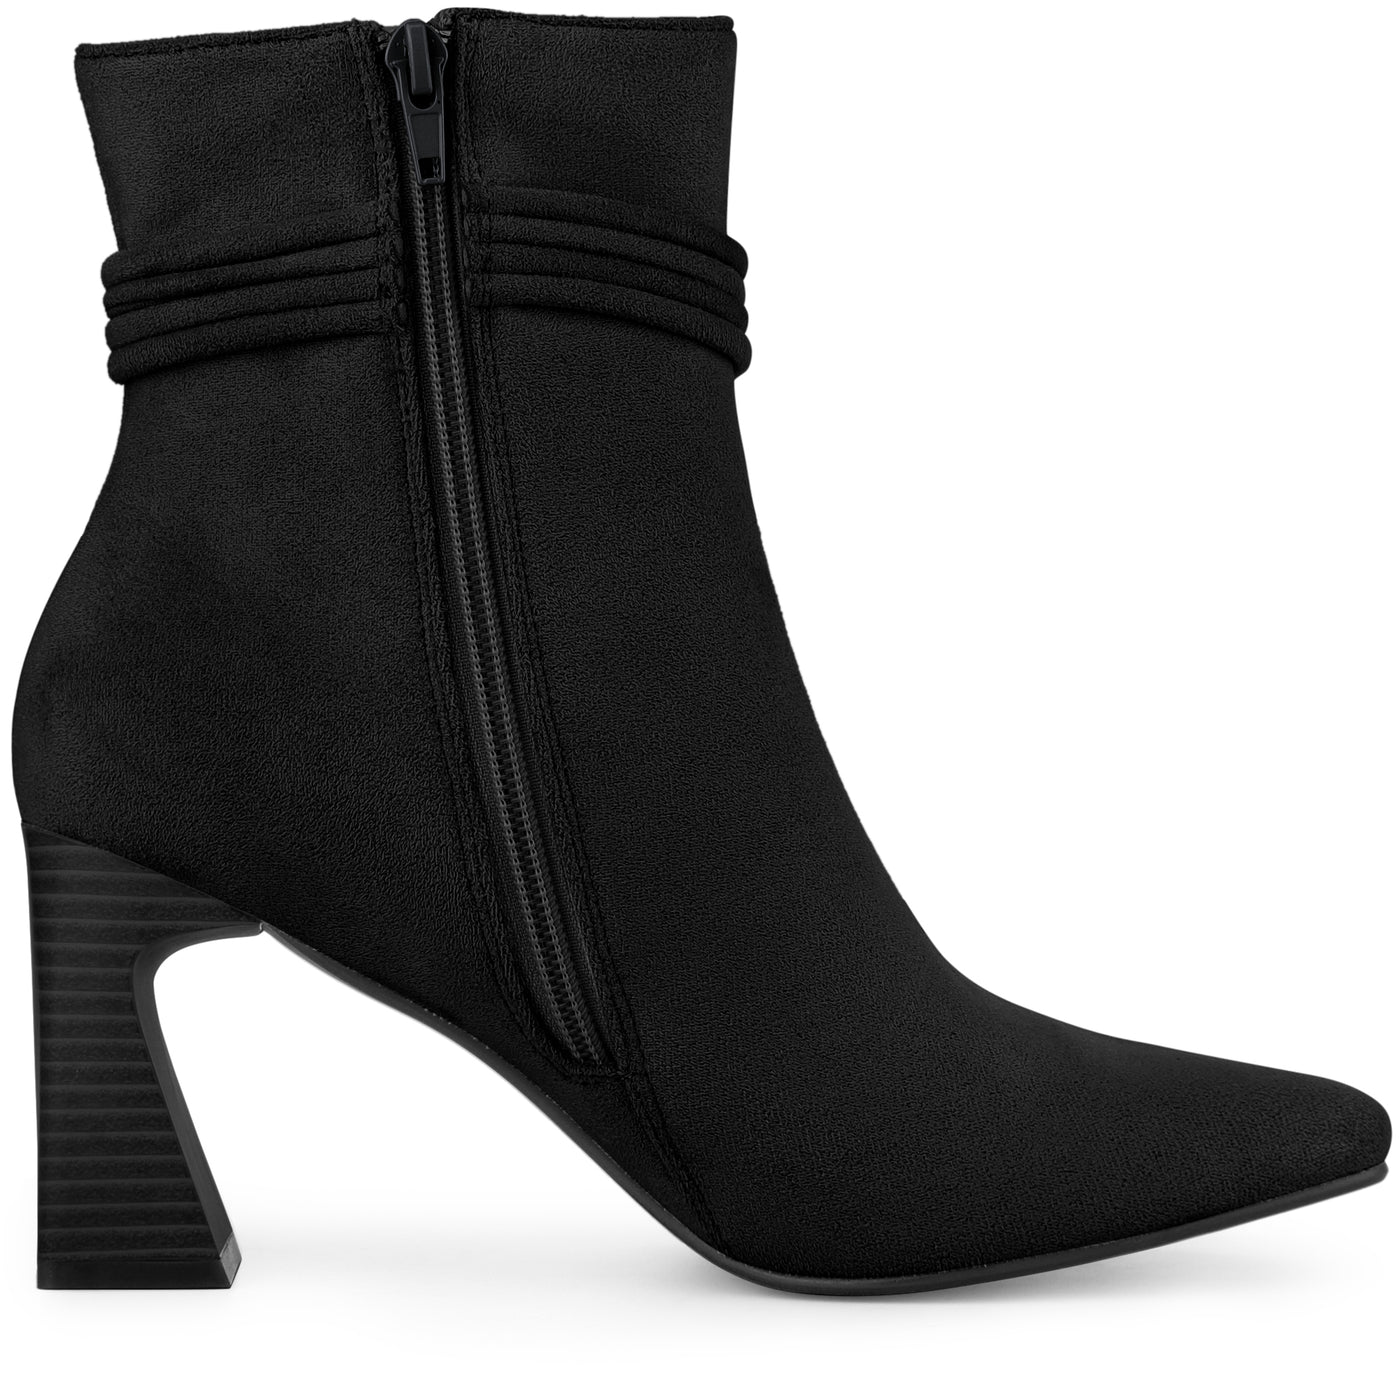 Allegra K Knot Decor Square Toe Side Zip Chunky Heel Ankle Boots